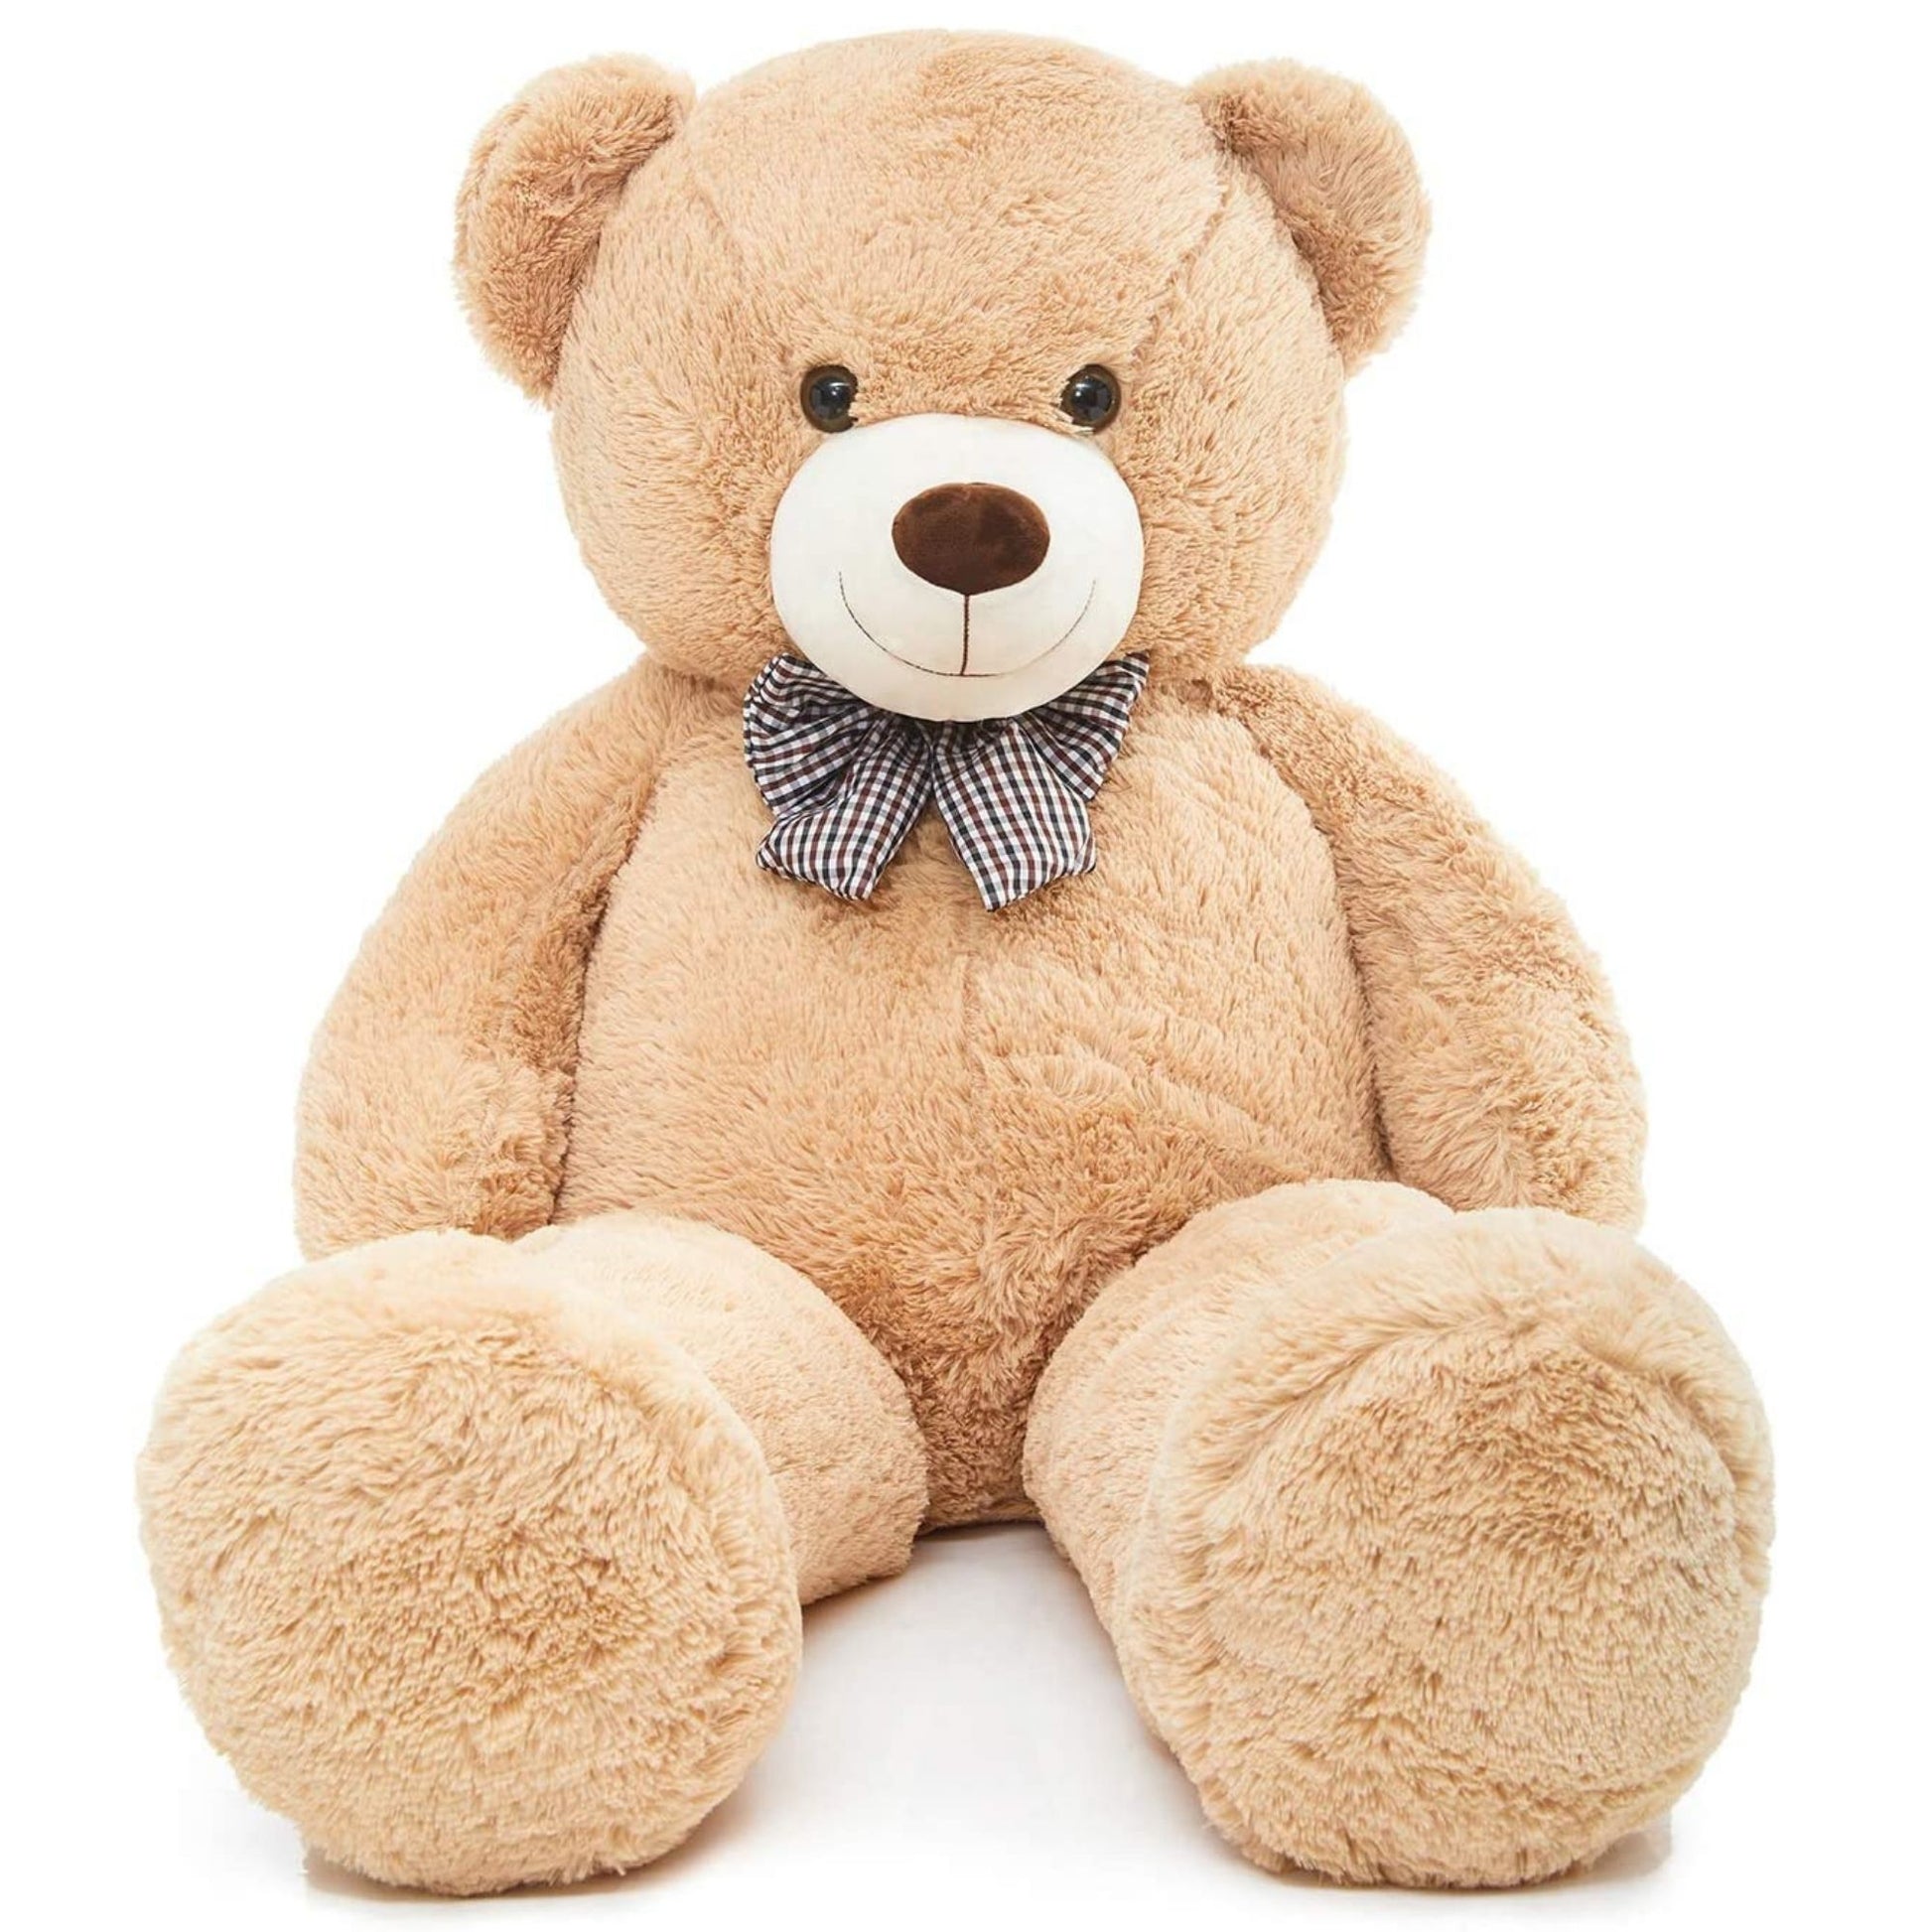 Giant Teddy Bear Stuffed Toy, Light Brown, 47/55/59/70.86 Inches